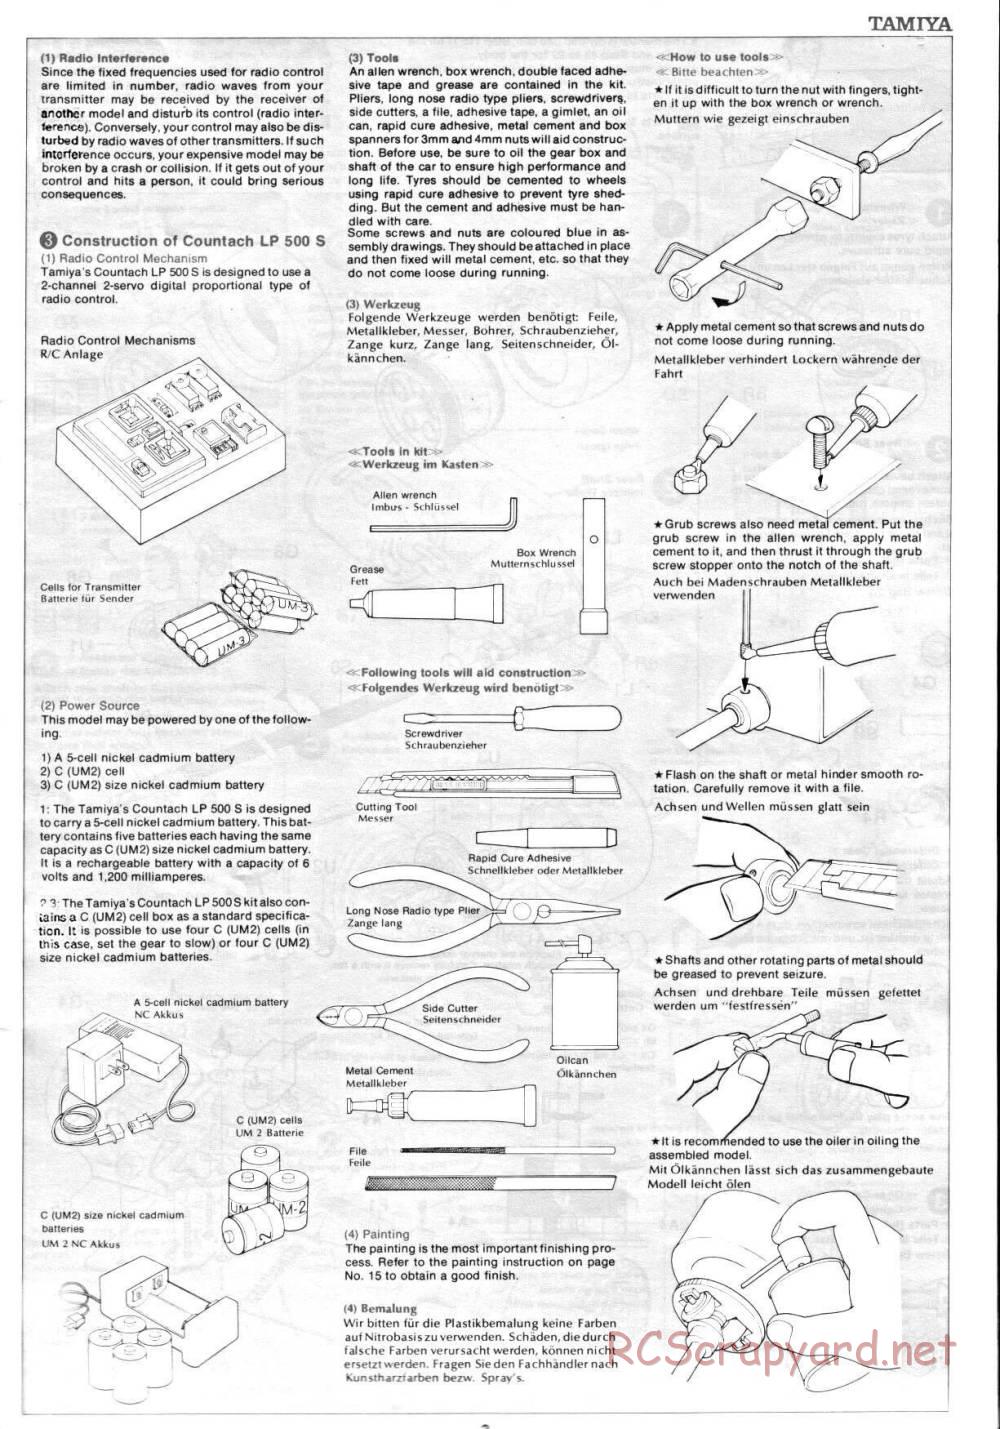 Tamiya - Lmbrghni Countach LP500S - 58005 - Manual - Page 3